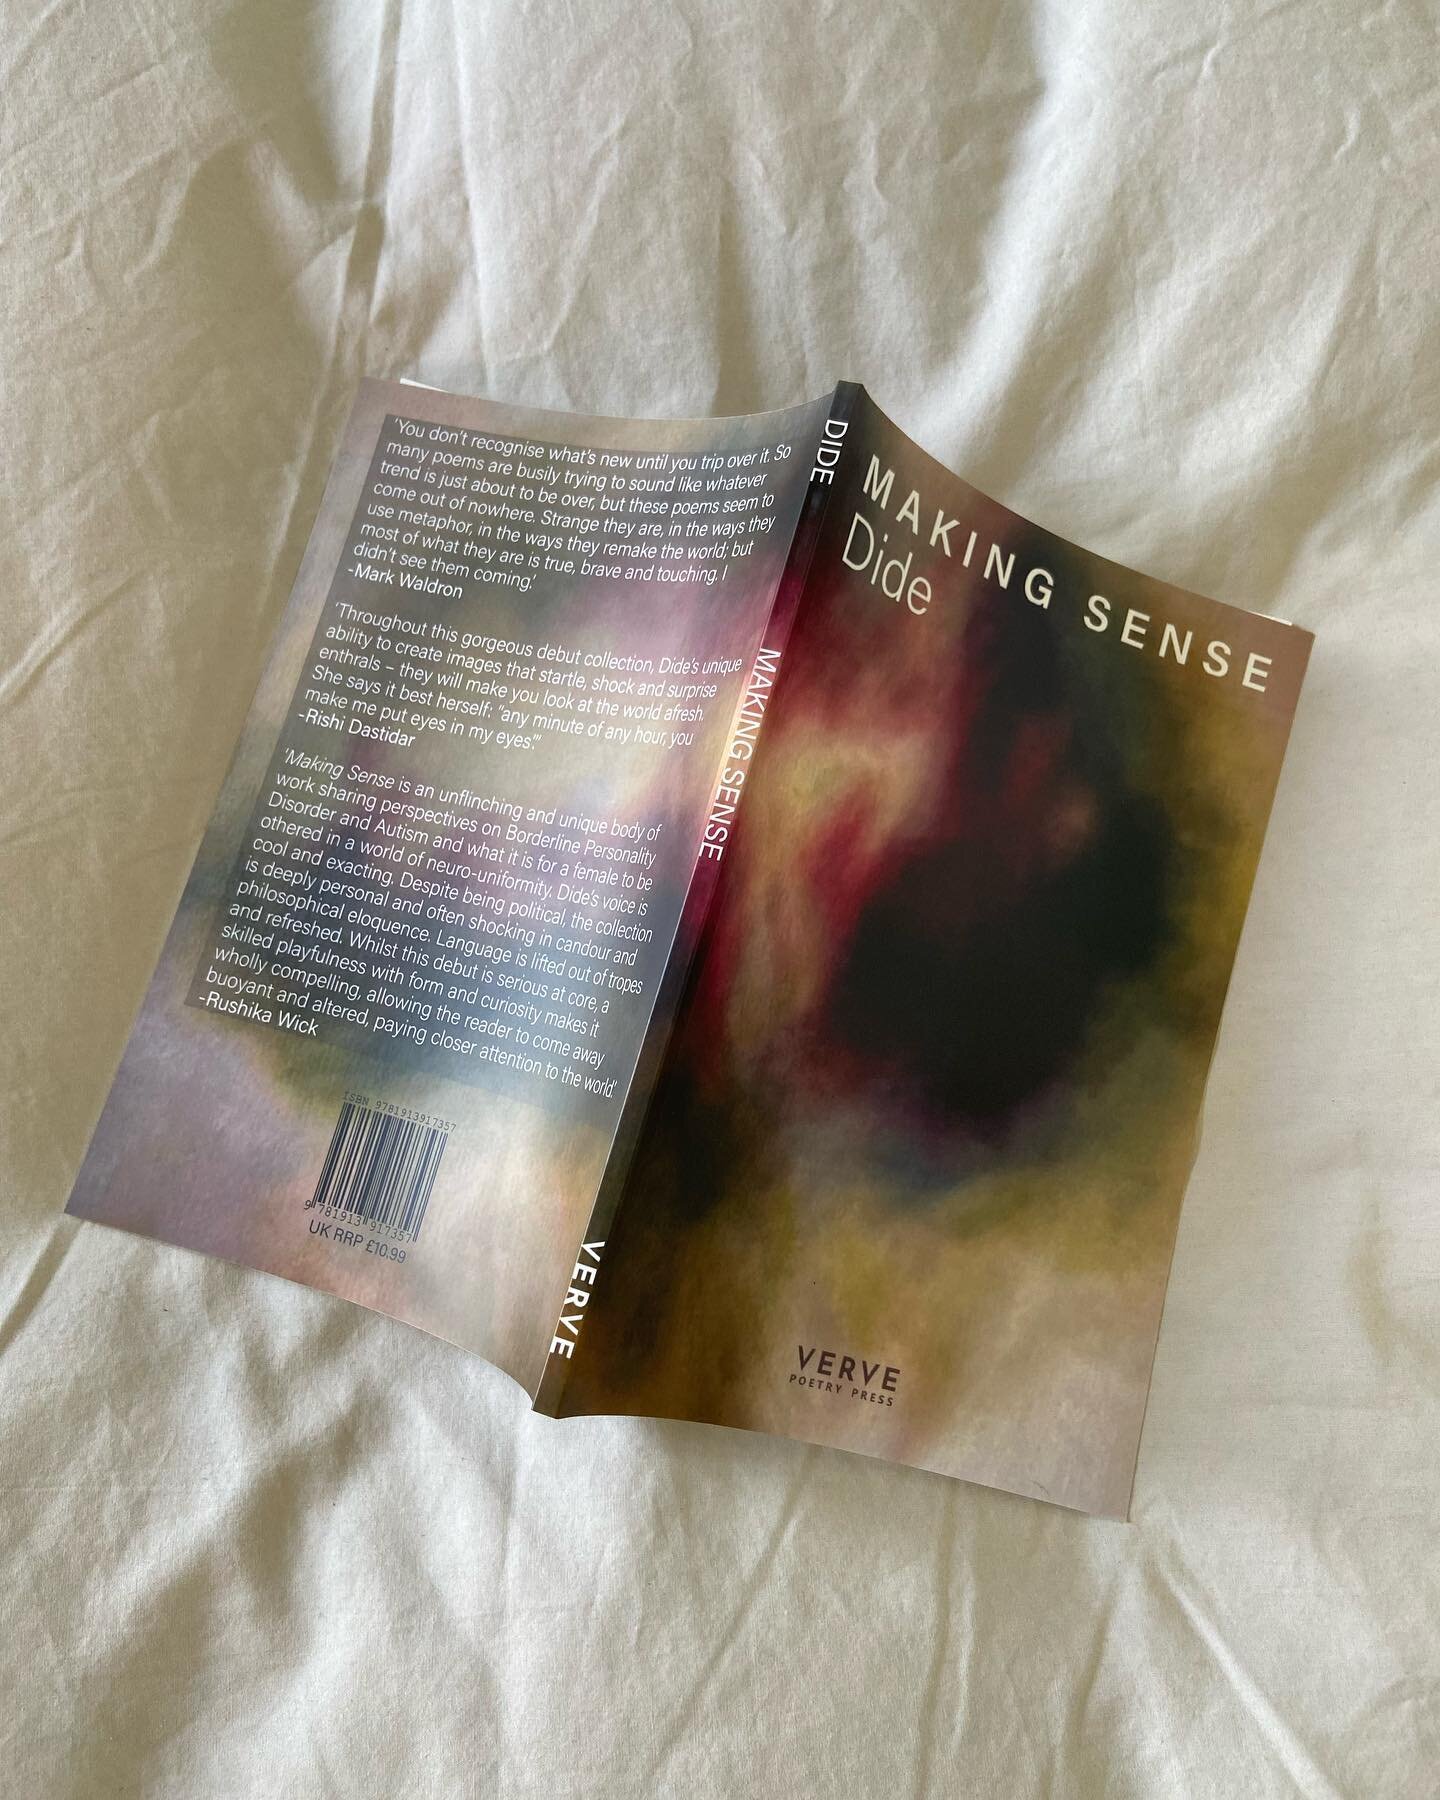 Making Sense is published today! Thank you to the amazing poets Mark Waldron, Rishi Dastidar and Rushika Wick for writing such lovely things about it on the back cover. To Stuart for publishing it (and bearing with me when I lost sleep just before se